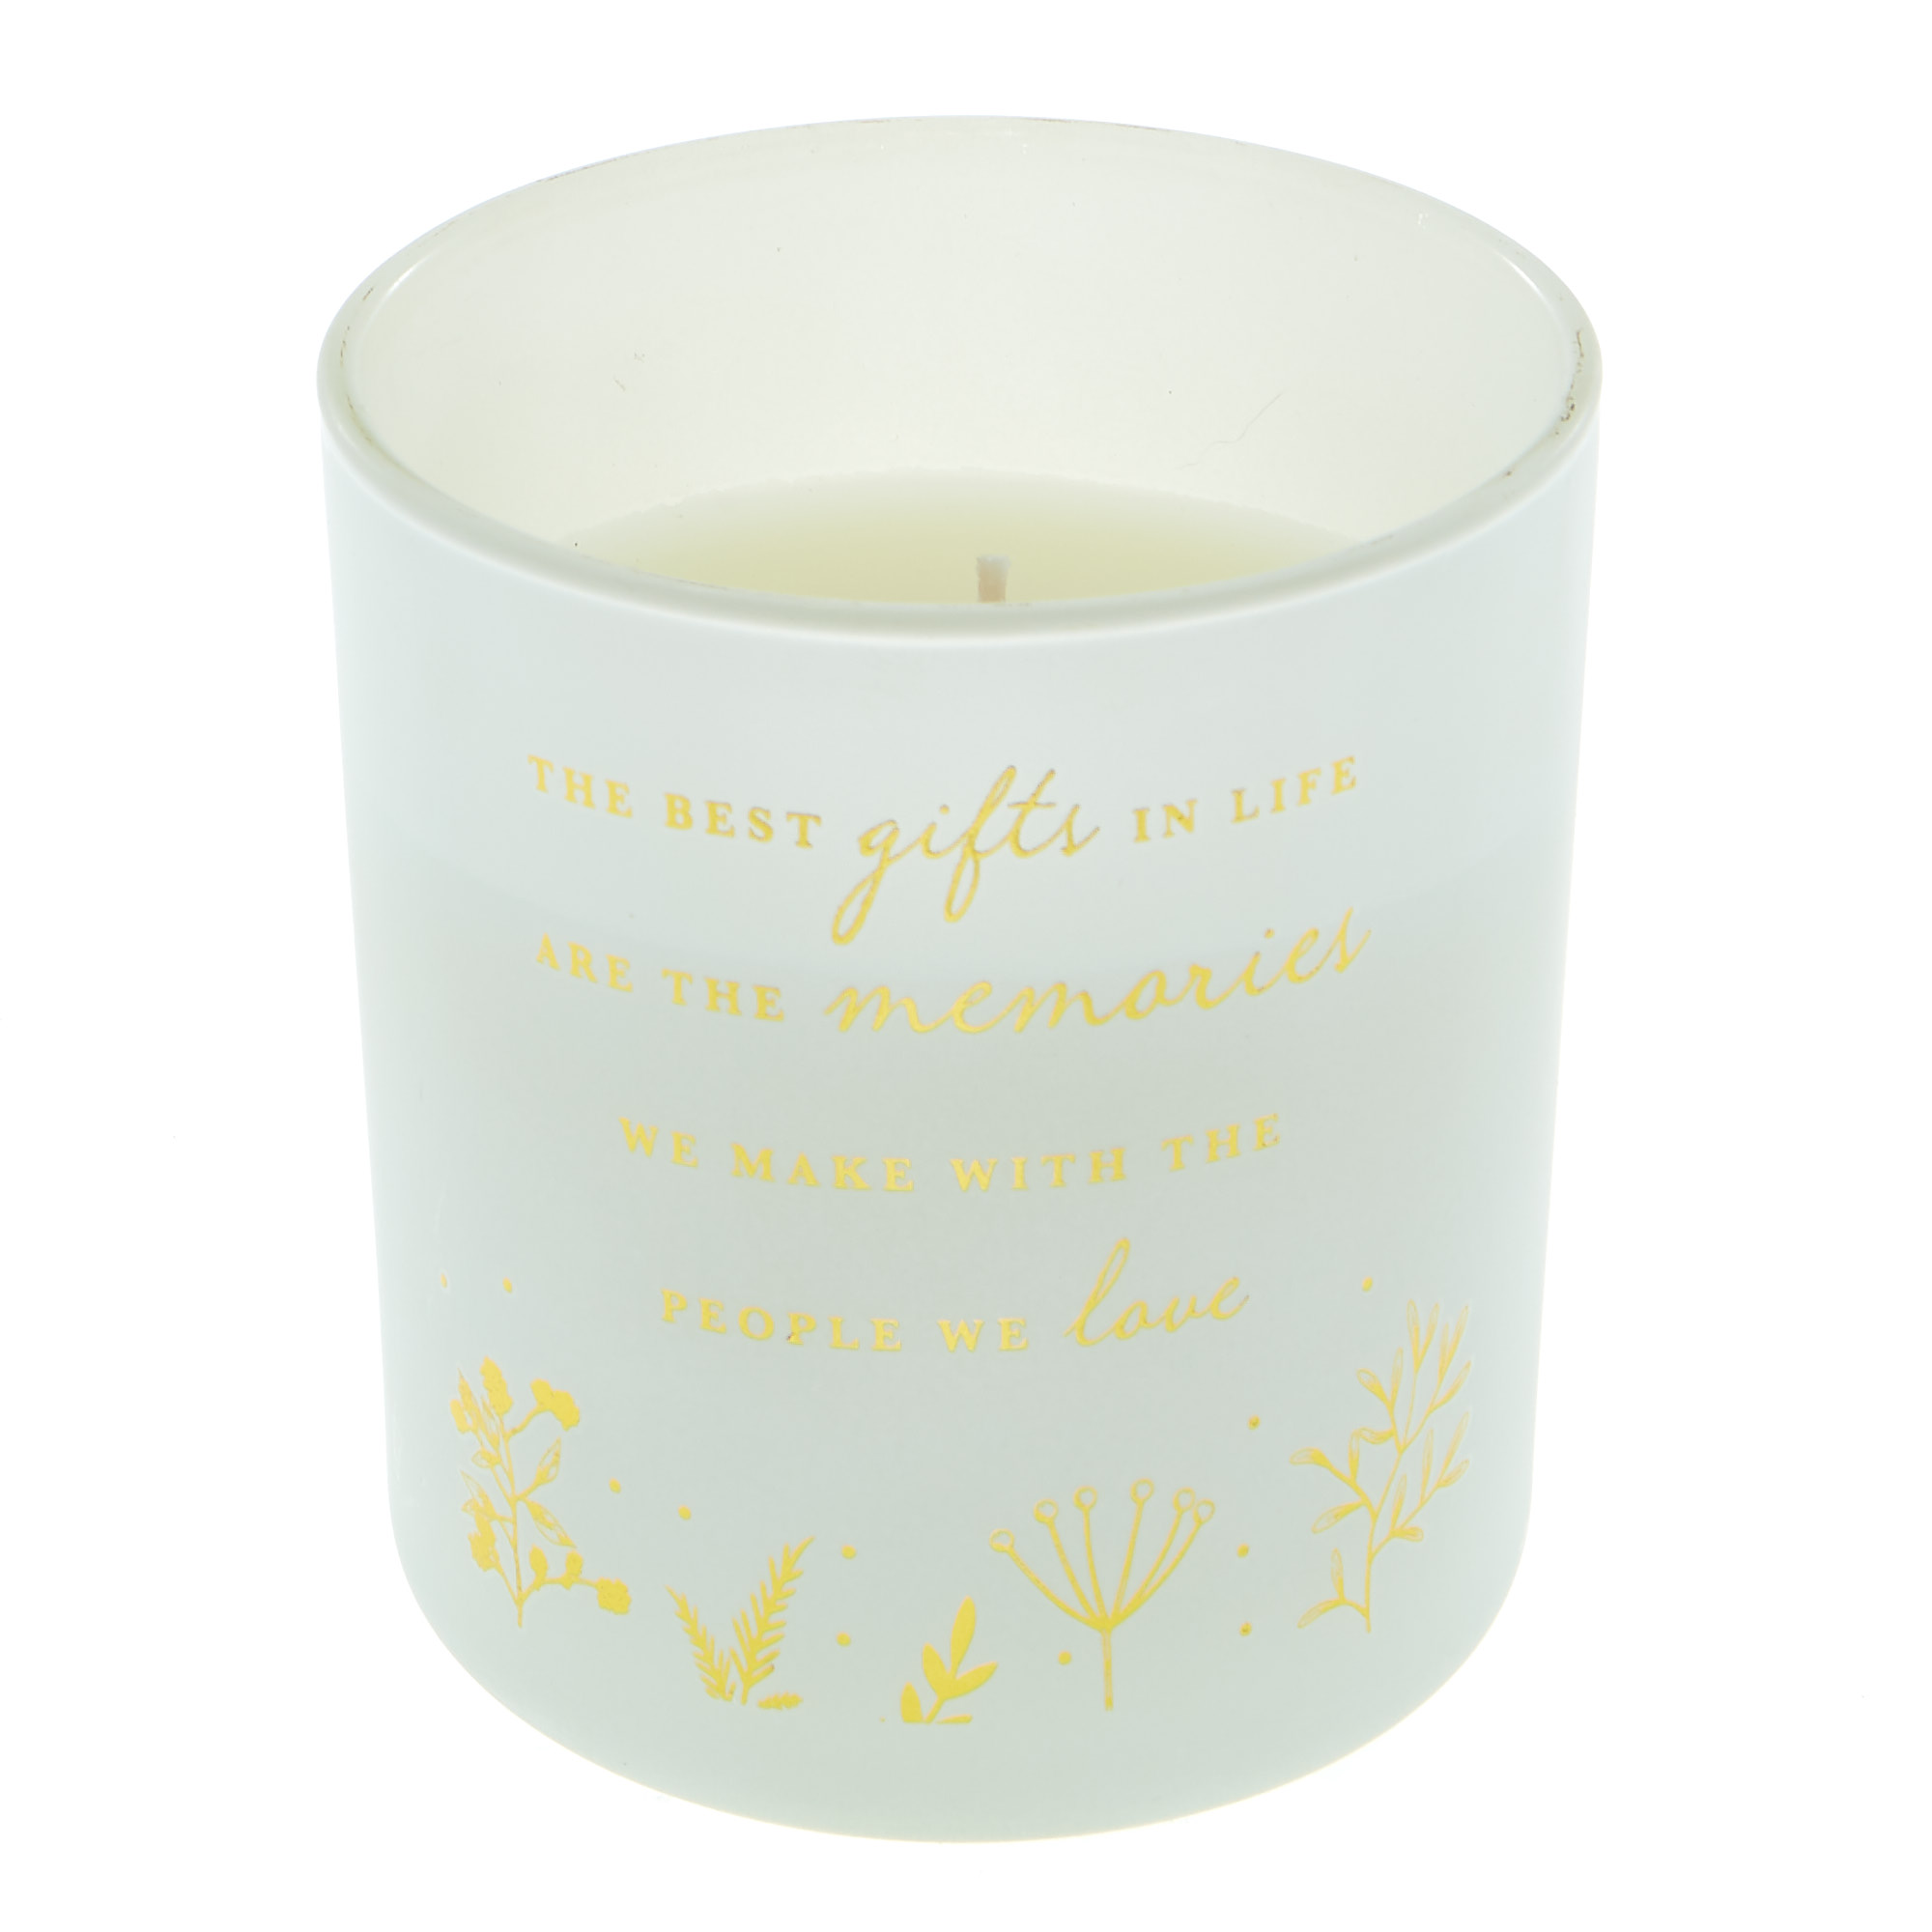 Memories Caramel Almond Scented Candle